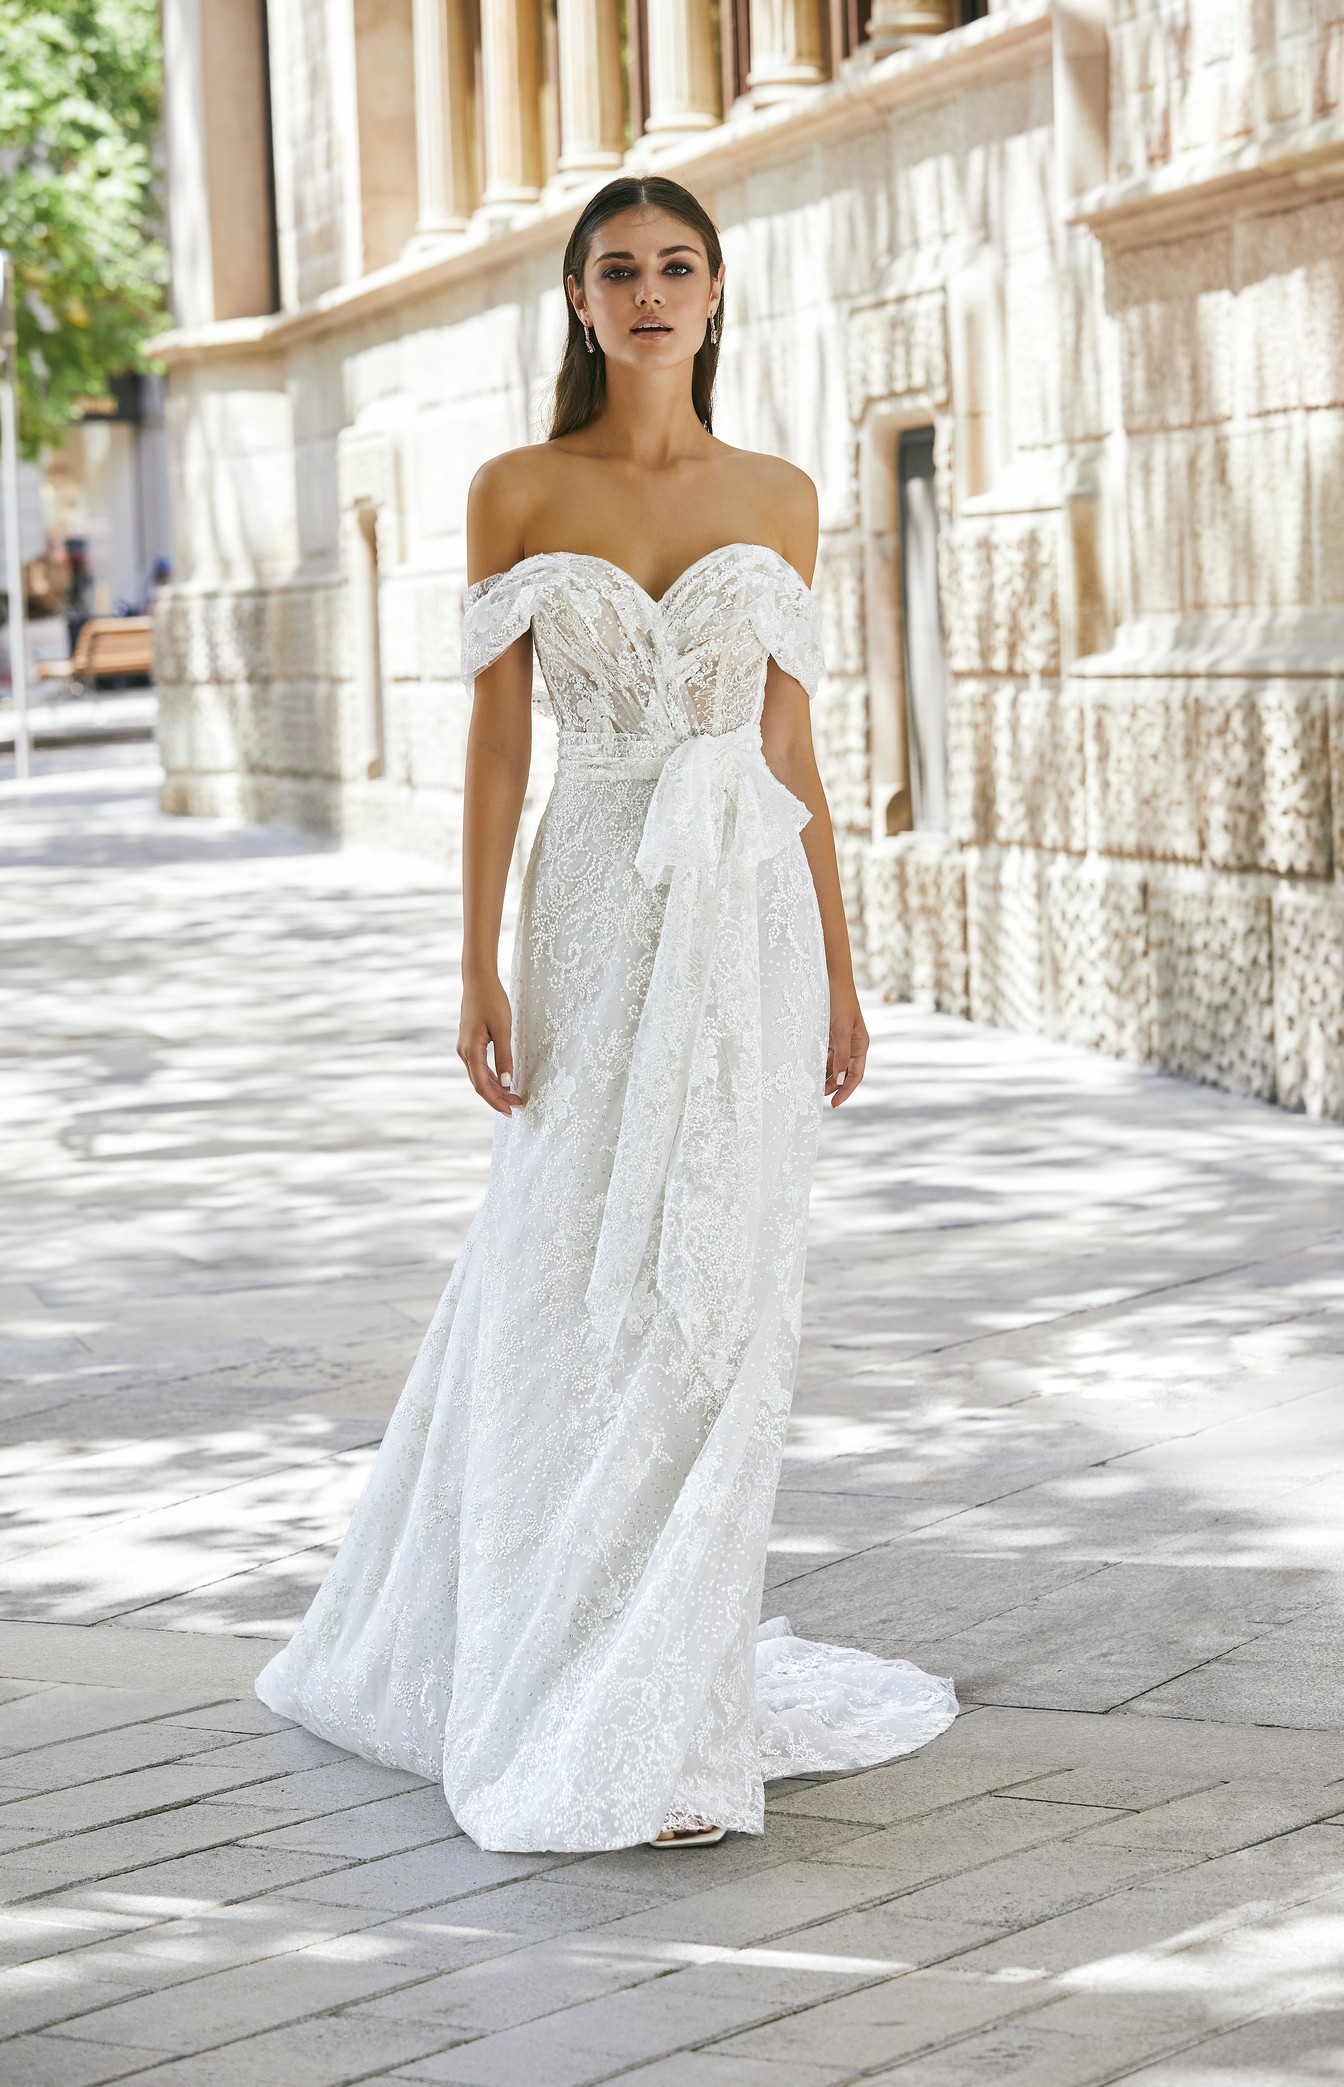 Model wearing one of our off the shoulder wedding dresses, Ronald Joyce style 69724, a floaty lace dress with an illusion bodice, striking bow waist tie and draped sleeves